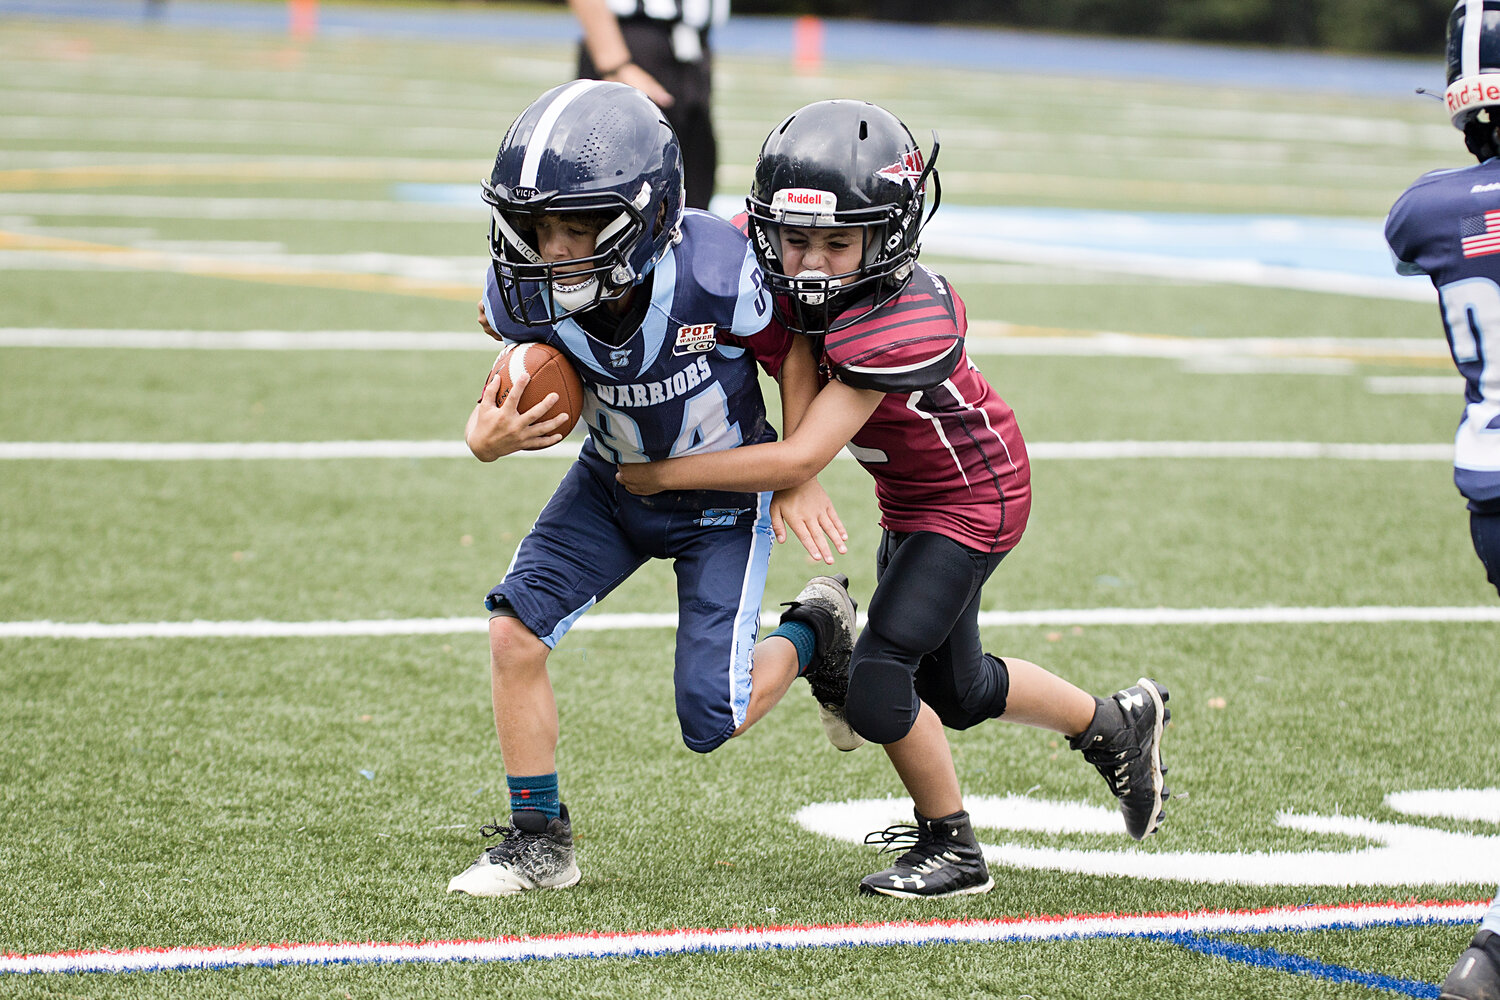 Brody Silver stops a Seekonk running back from advancing the ball.